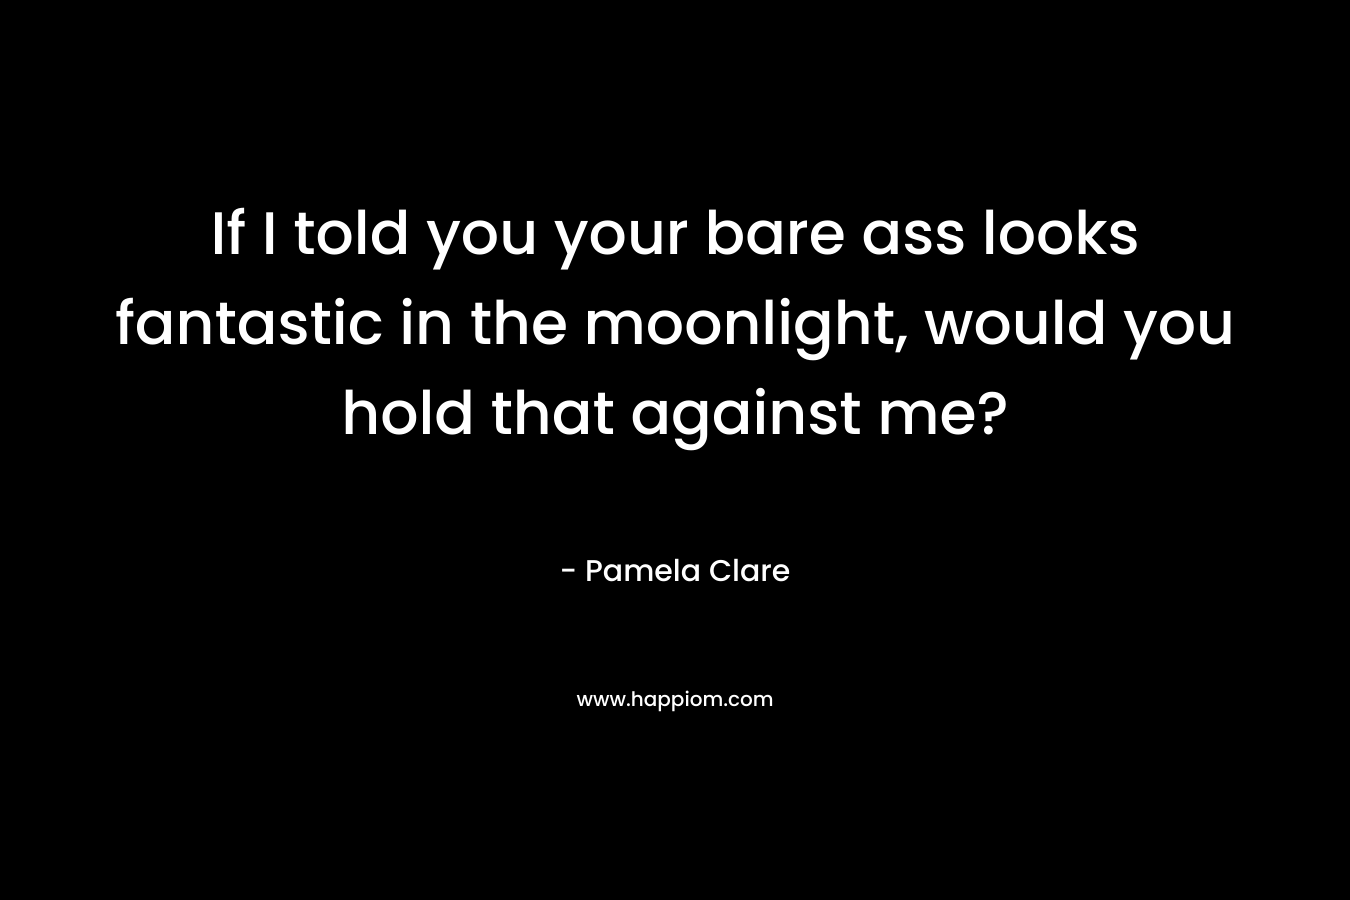 If I told you your bare ass looks fantastic in the moonlight, would you hold that against me? – Pamela Clare